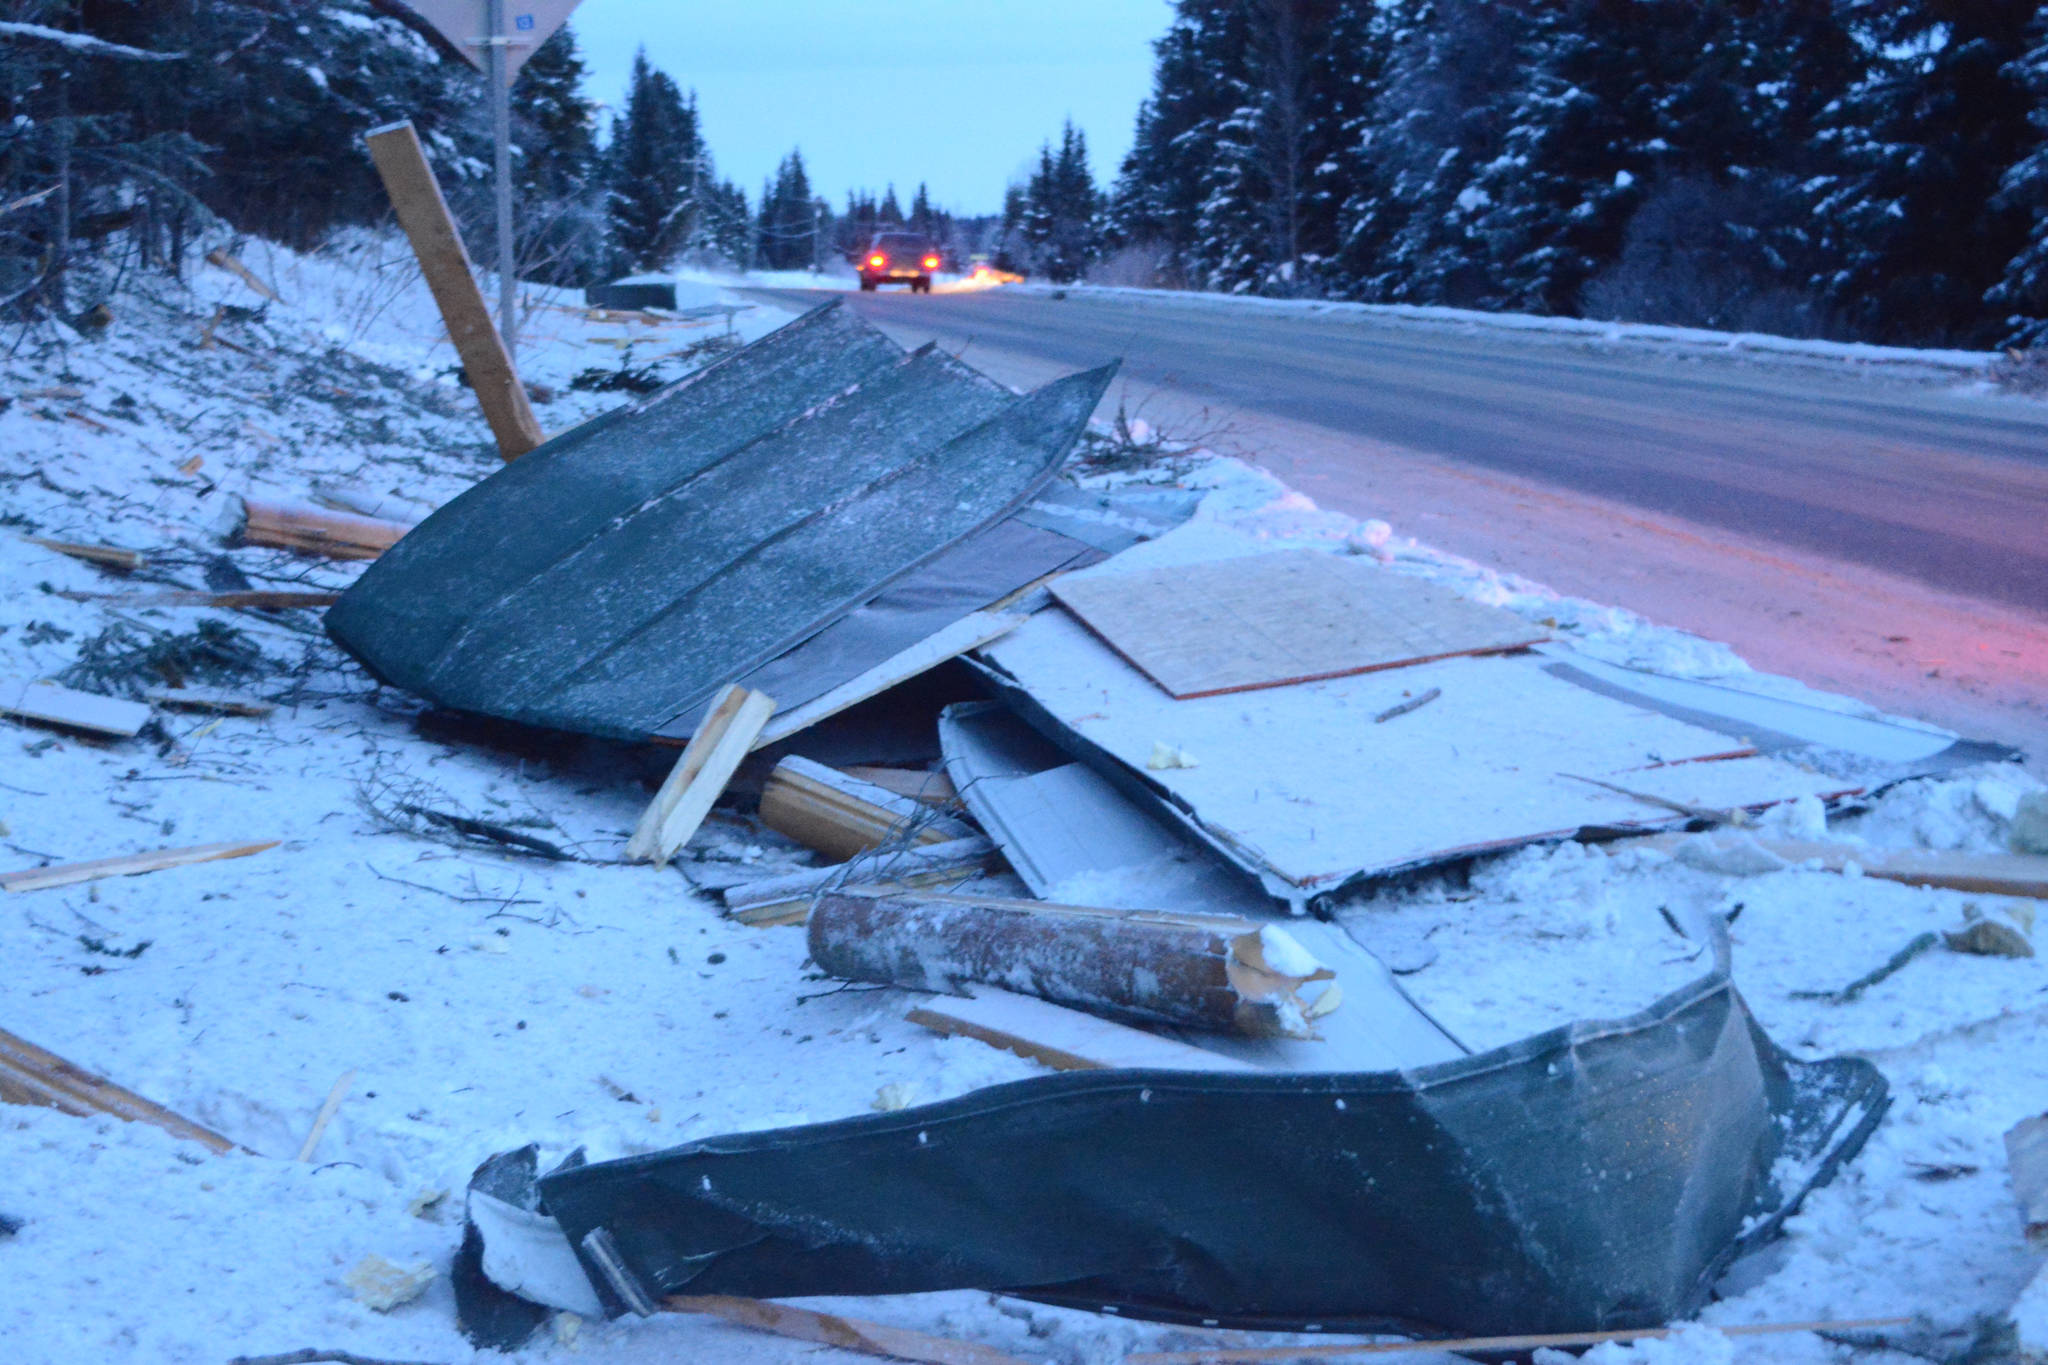 Debris from an exploded house is piled by the road near Mile 166 Sterling Highway on Friday, Dec. 28, 2018, near Homer, Alaska. The debris field from the explosion spread at least 200 feet in all directions. (Photo by Michael Armstrong/Homer News).